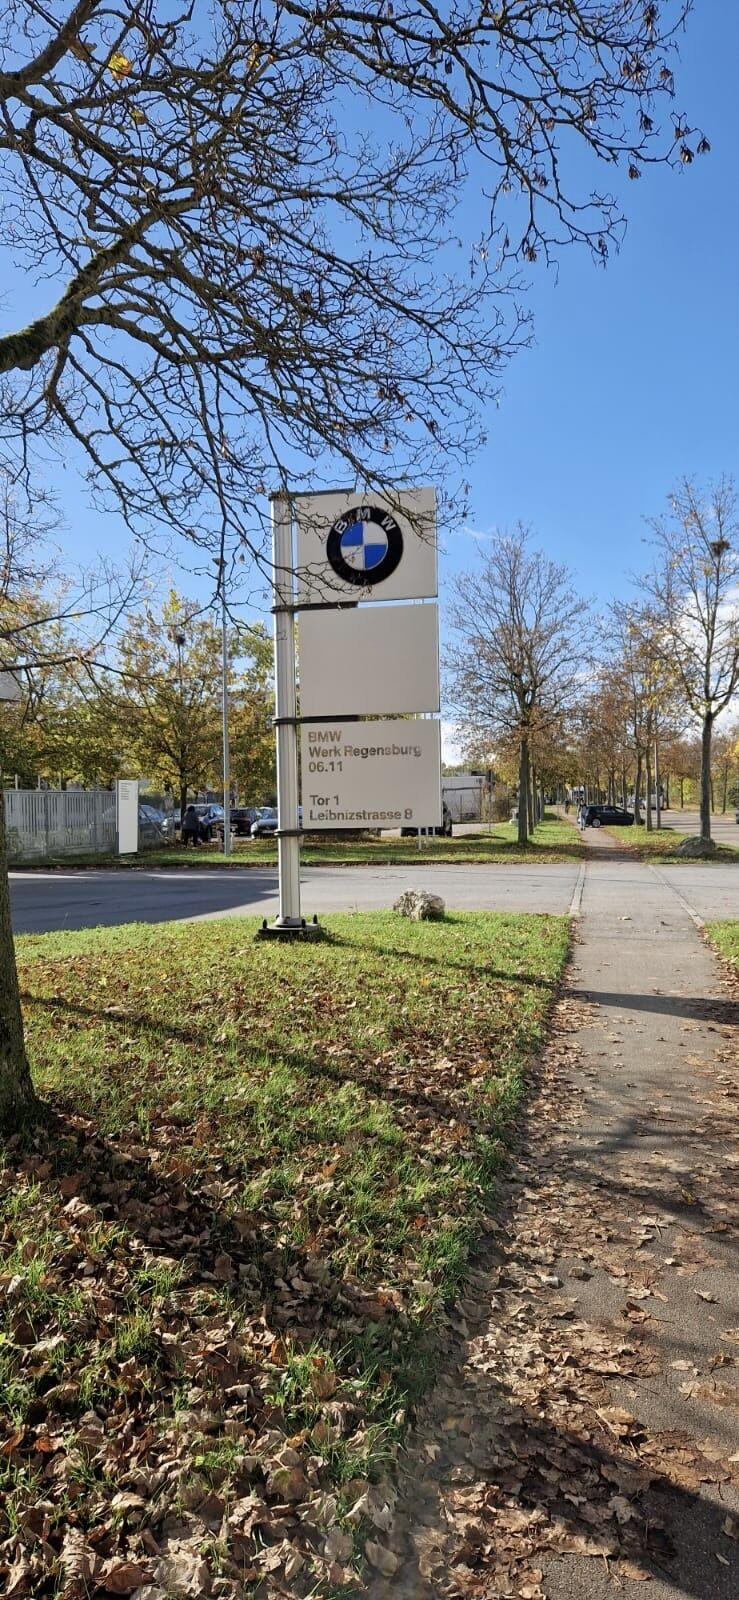 IB bei BMW in Regensburg - Cover Image